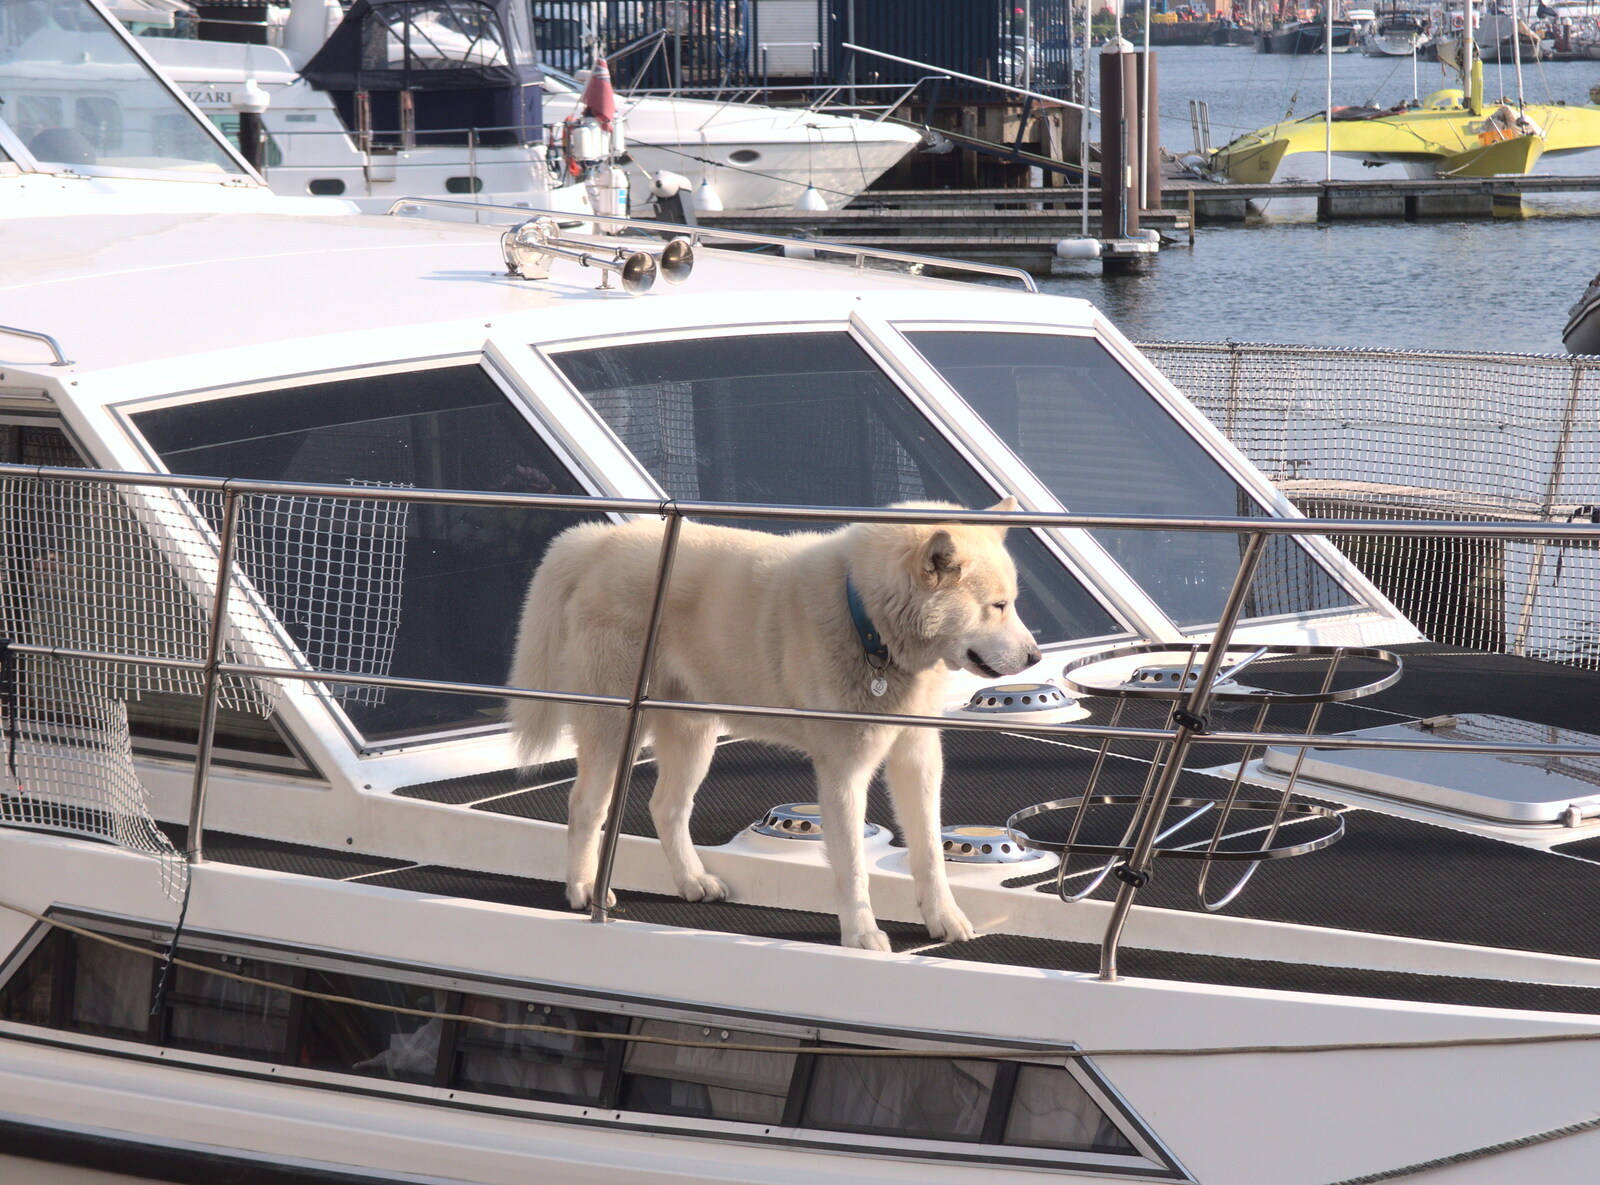 A big husky on a boat from An Unexpected Birthday, Ipswich, Suffolk - 26th May 2018